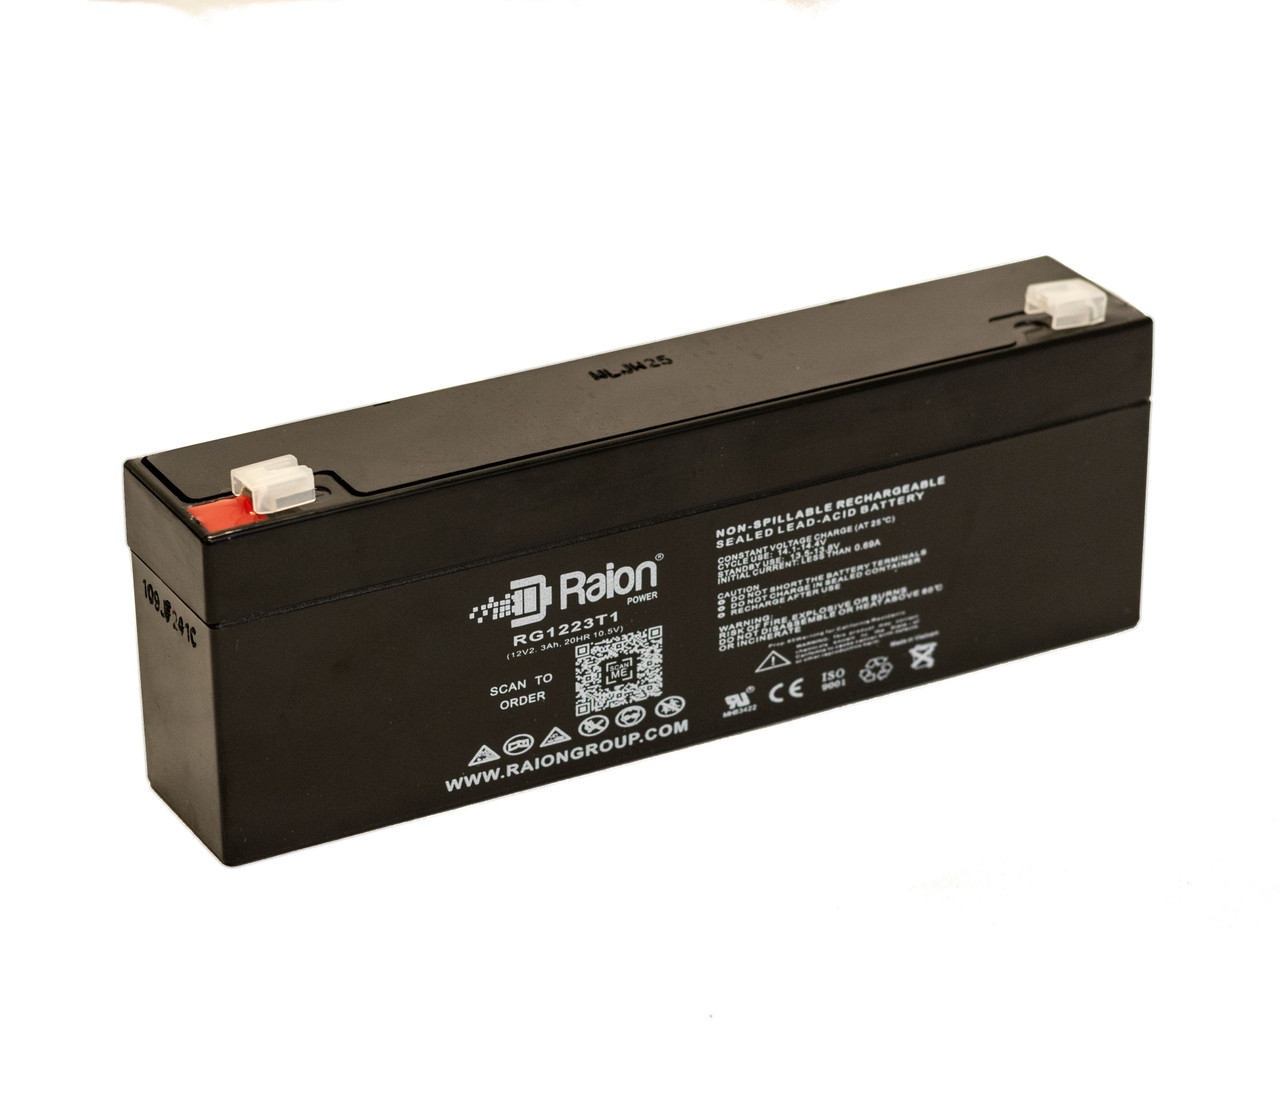 Raion Power RG1223T1 Replacement Battery for Johnson Controls GC1219